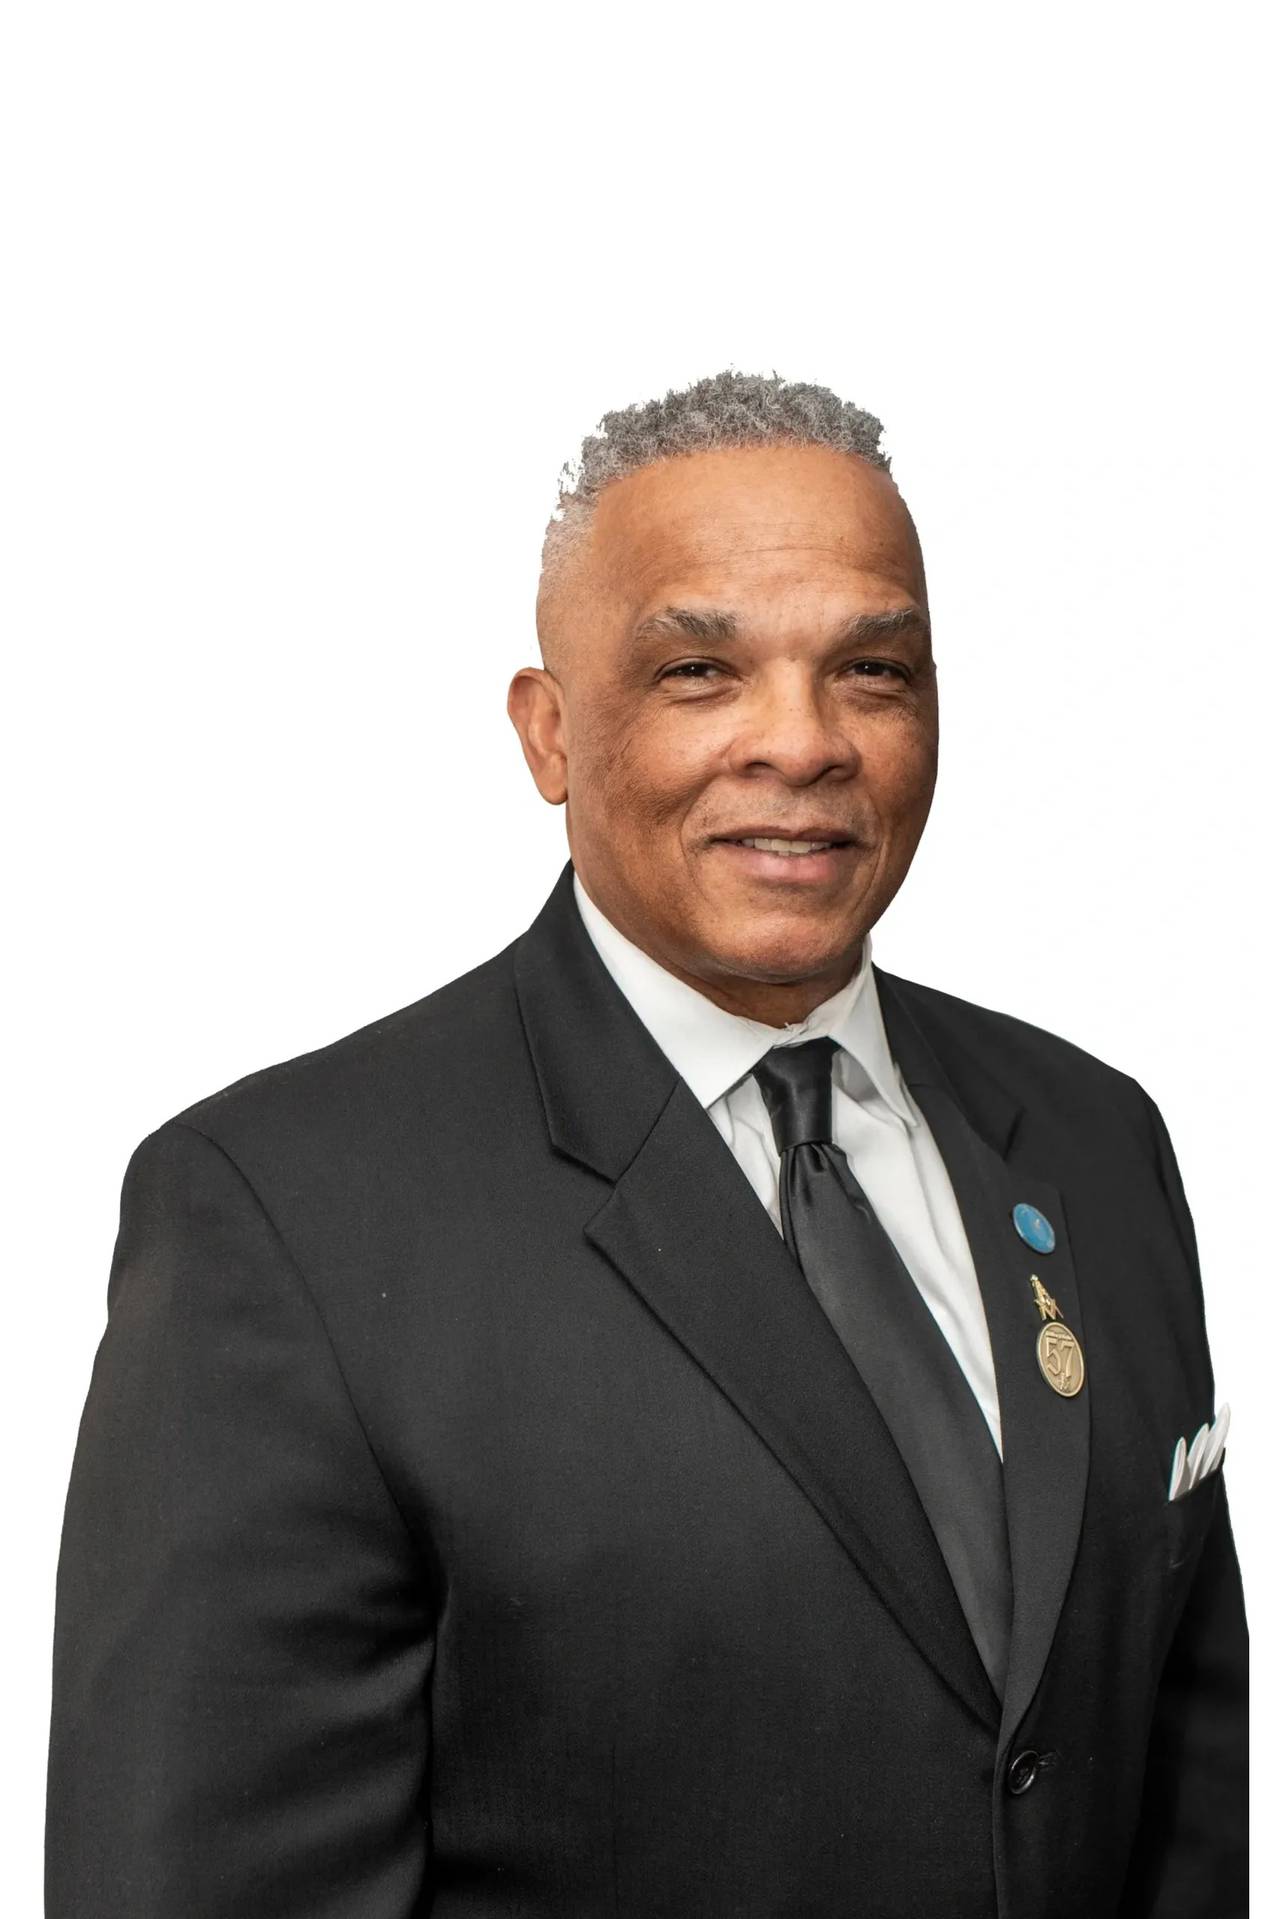 A photo of Marvin M. Briscoe wearing a black suit with a black tie and white shirt against a white background.